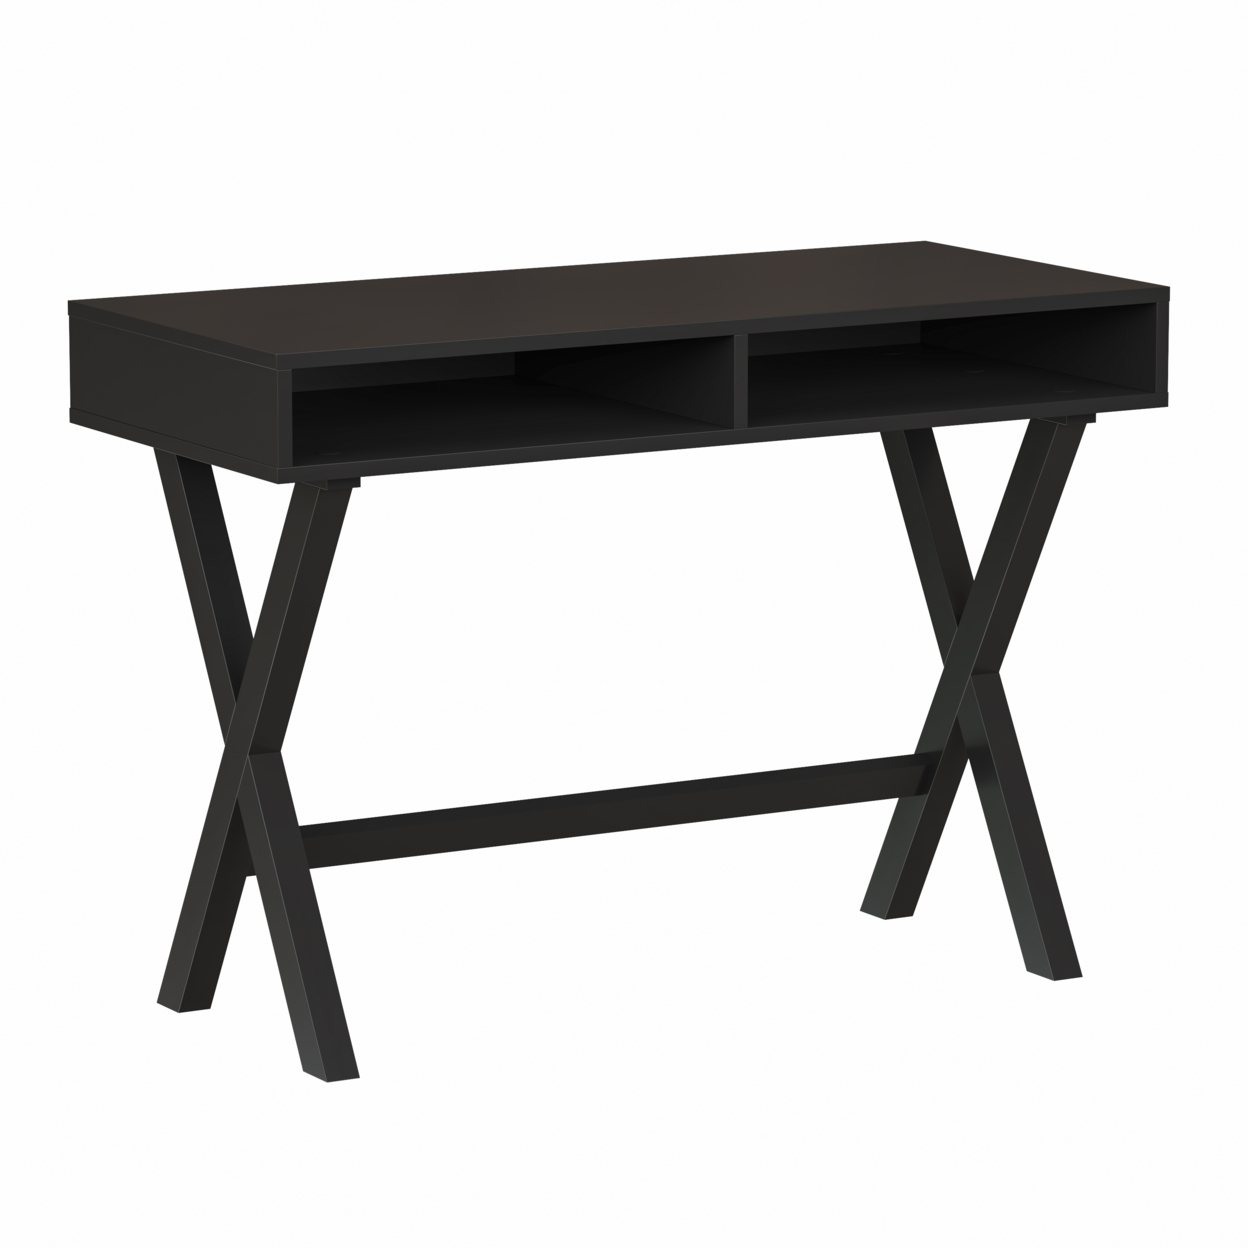 Home Office Writing Computer Desk With Open Storage Compartments - Bedroom Desk For Writing And Work, Black